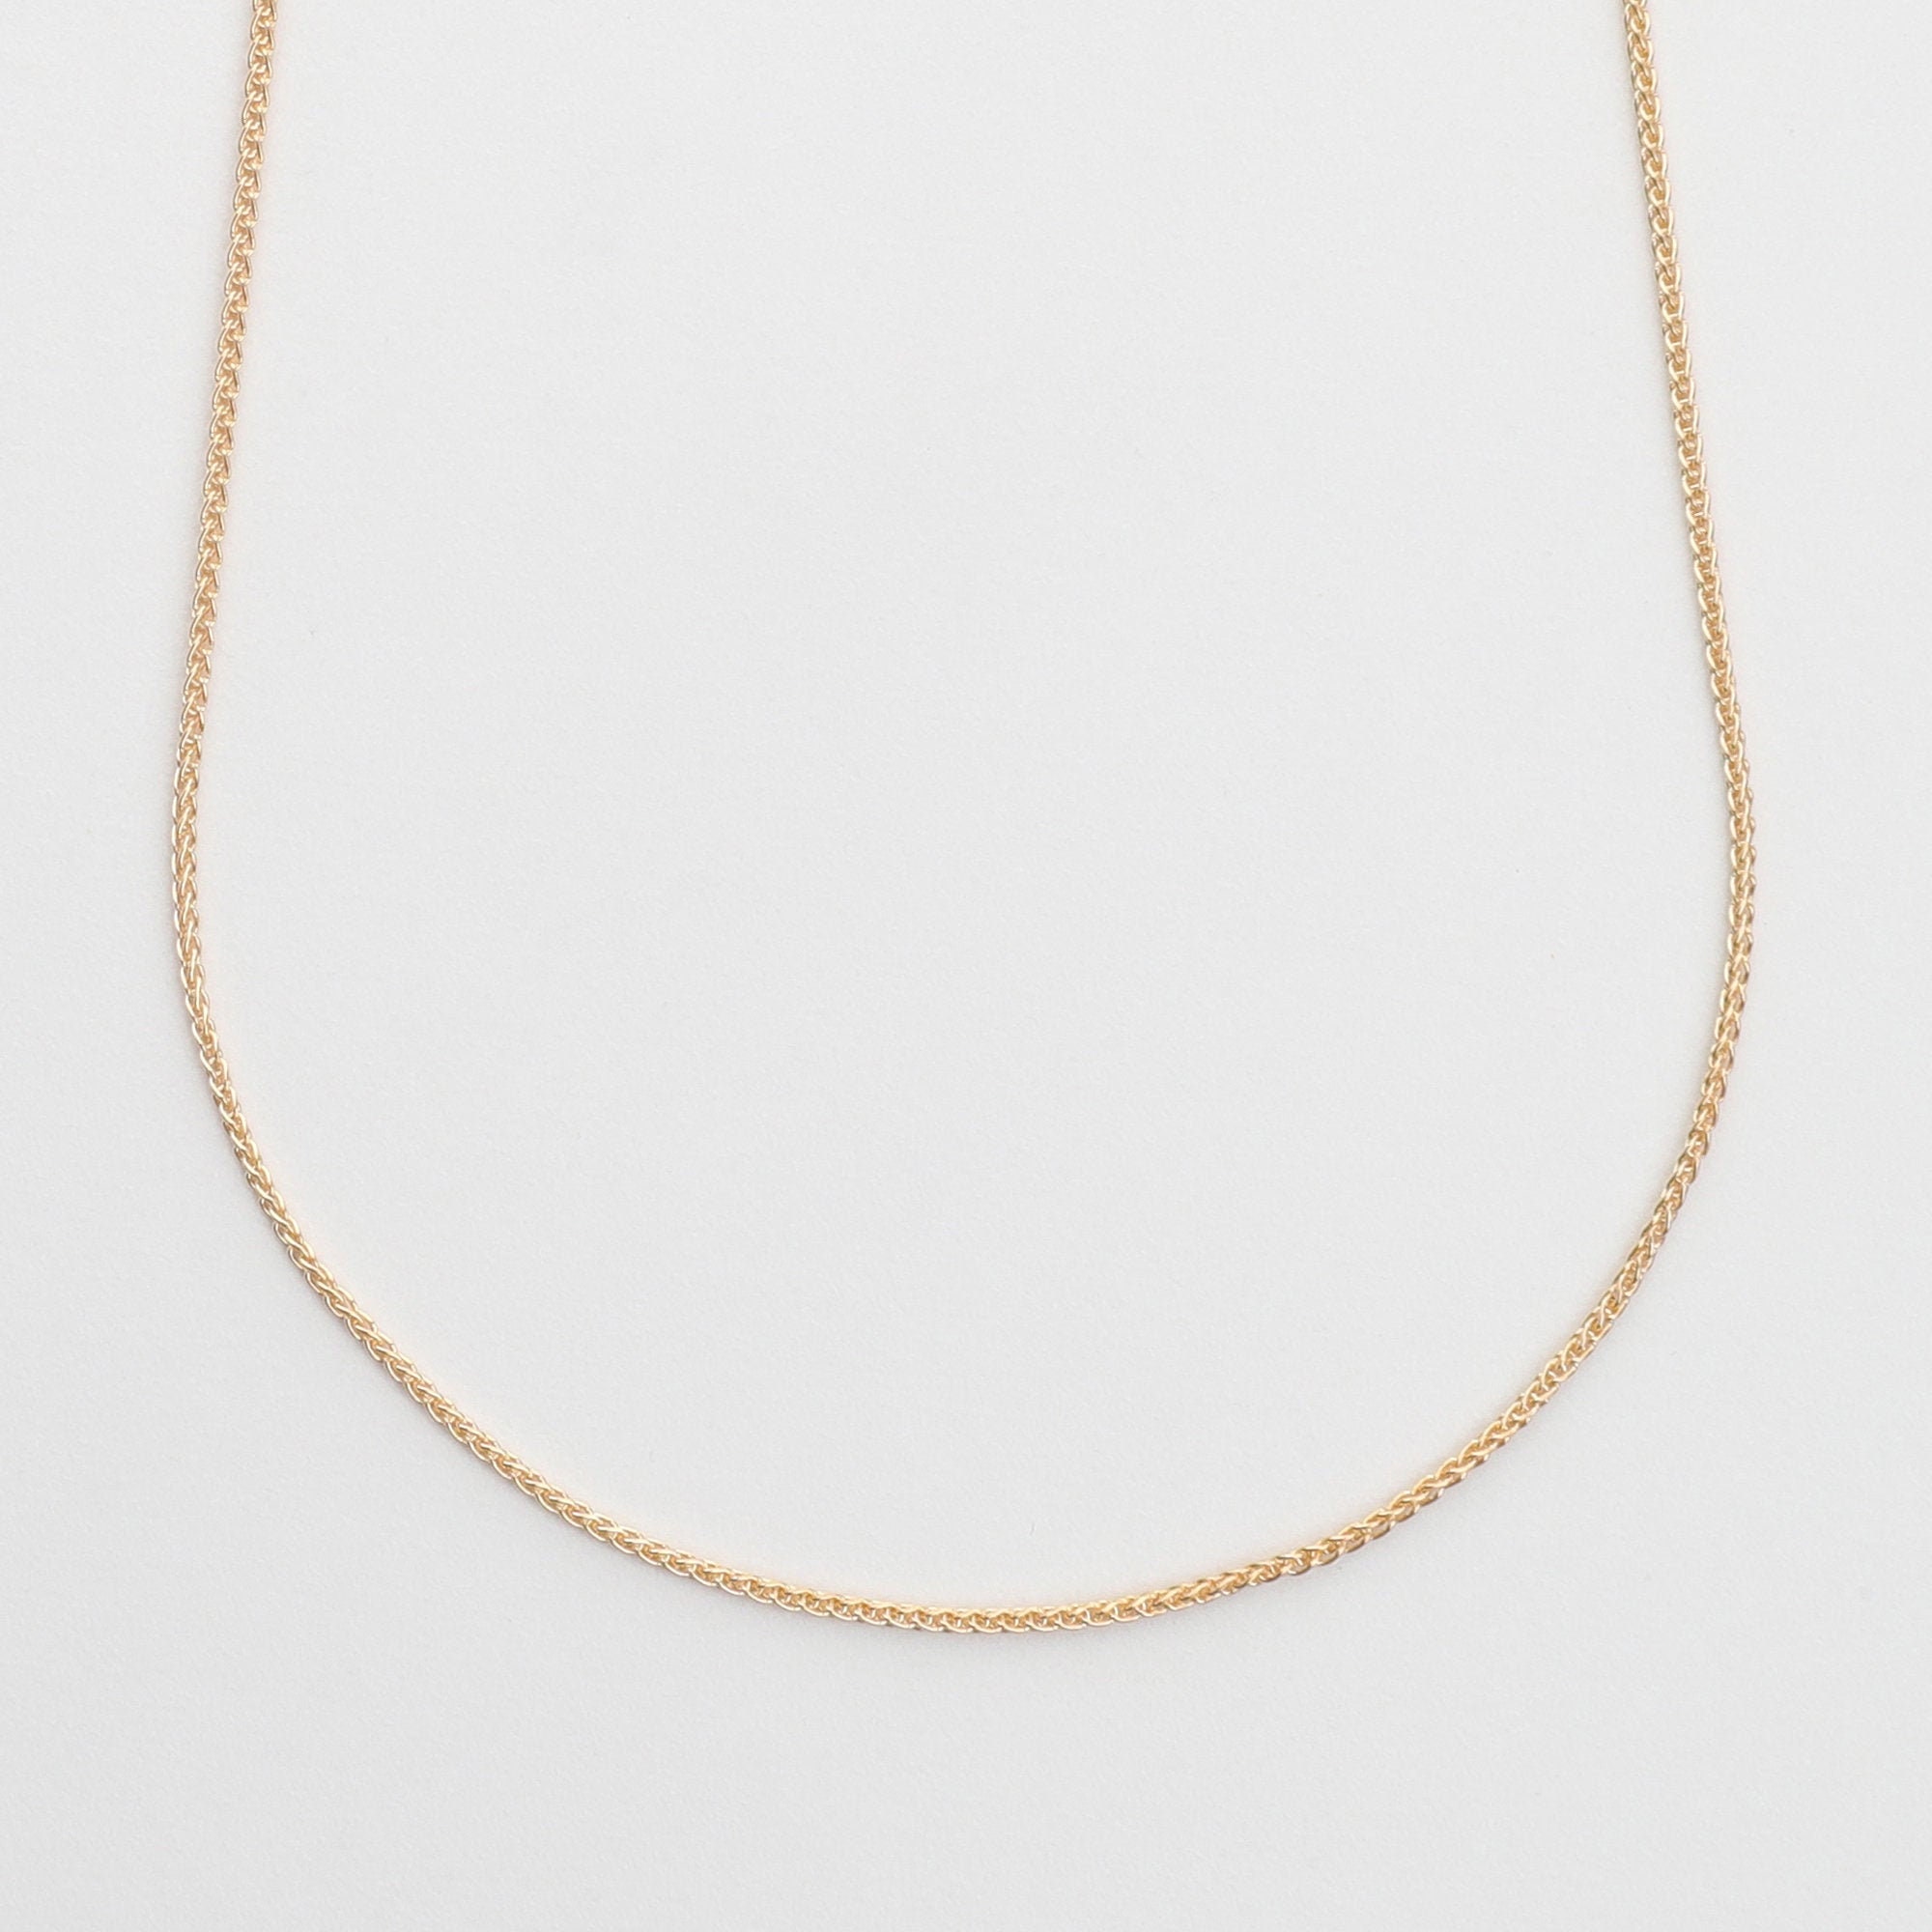 Gold Snake Chain Necklace 3mm Gold Chain Round Gold Necklace Short